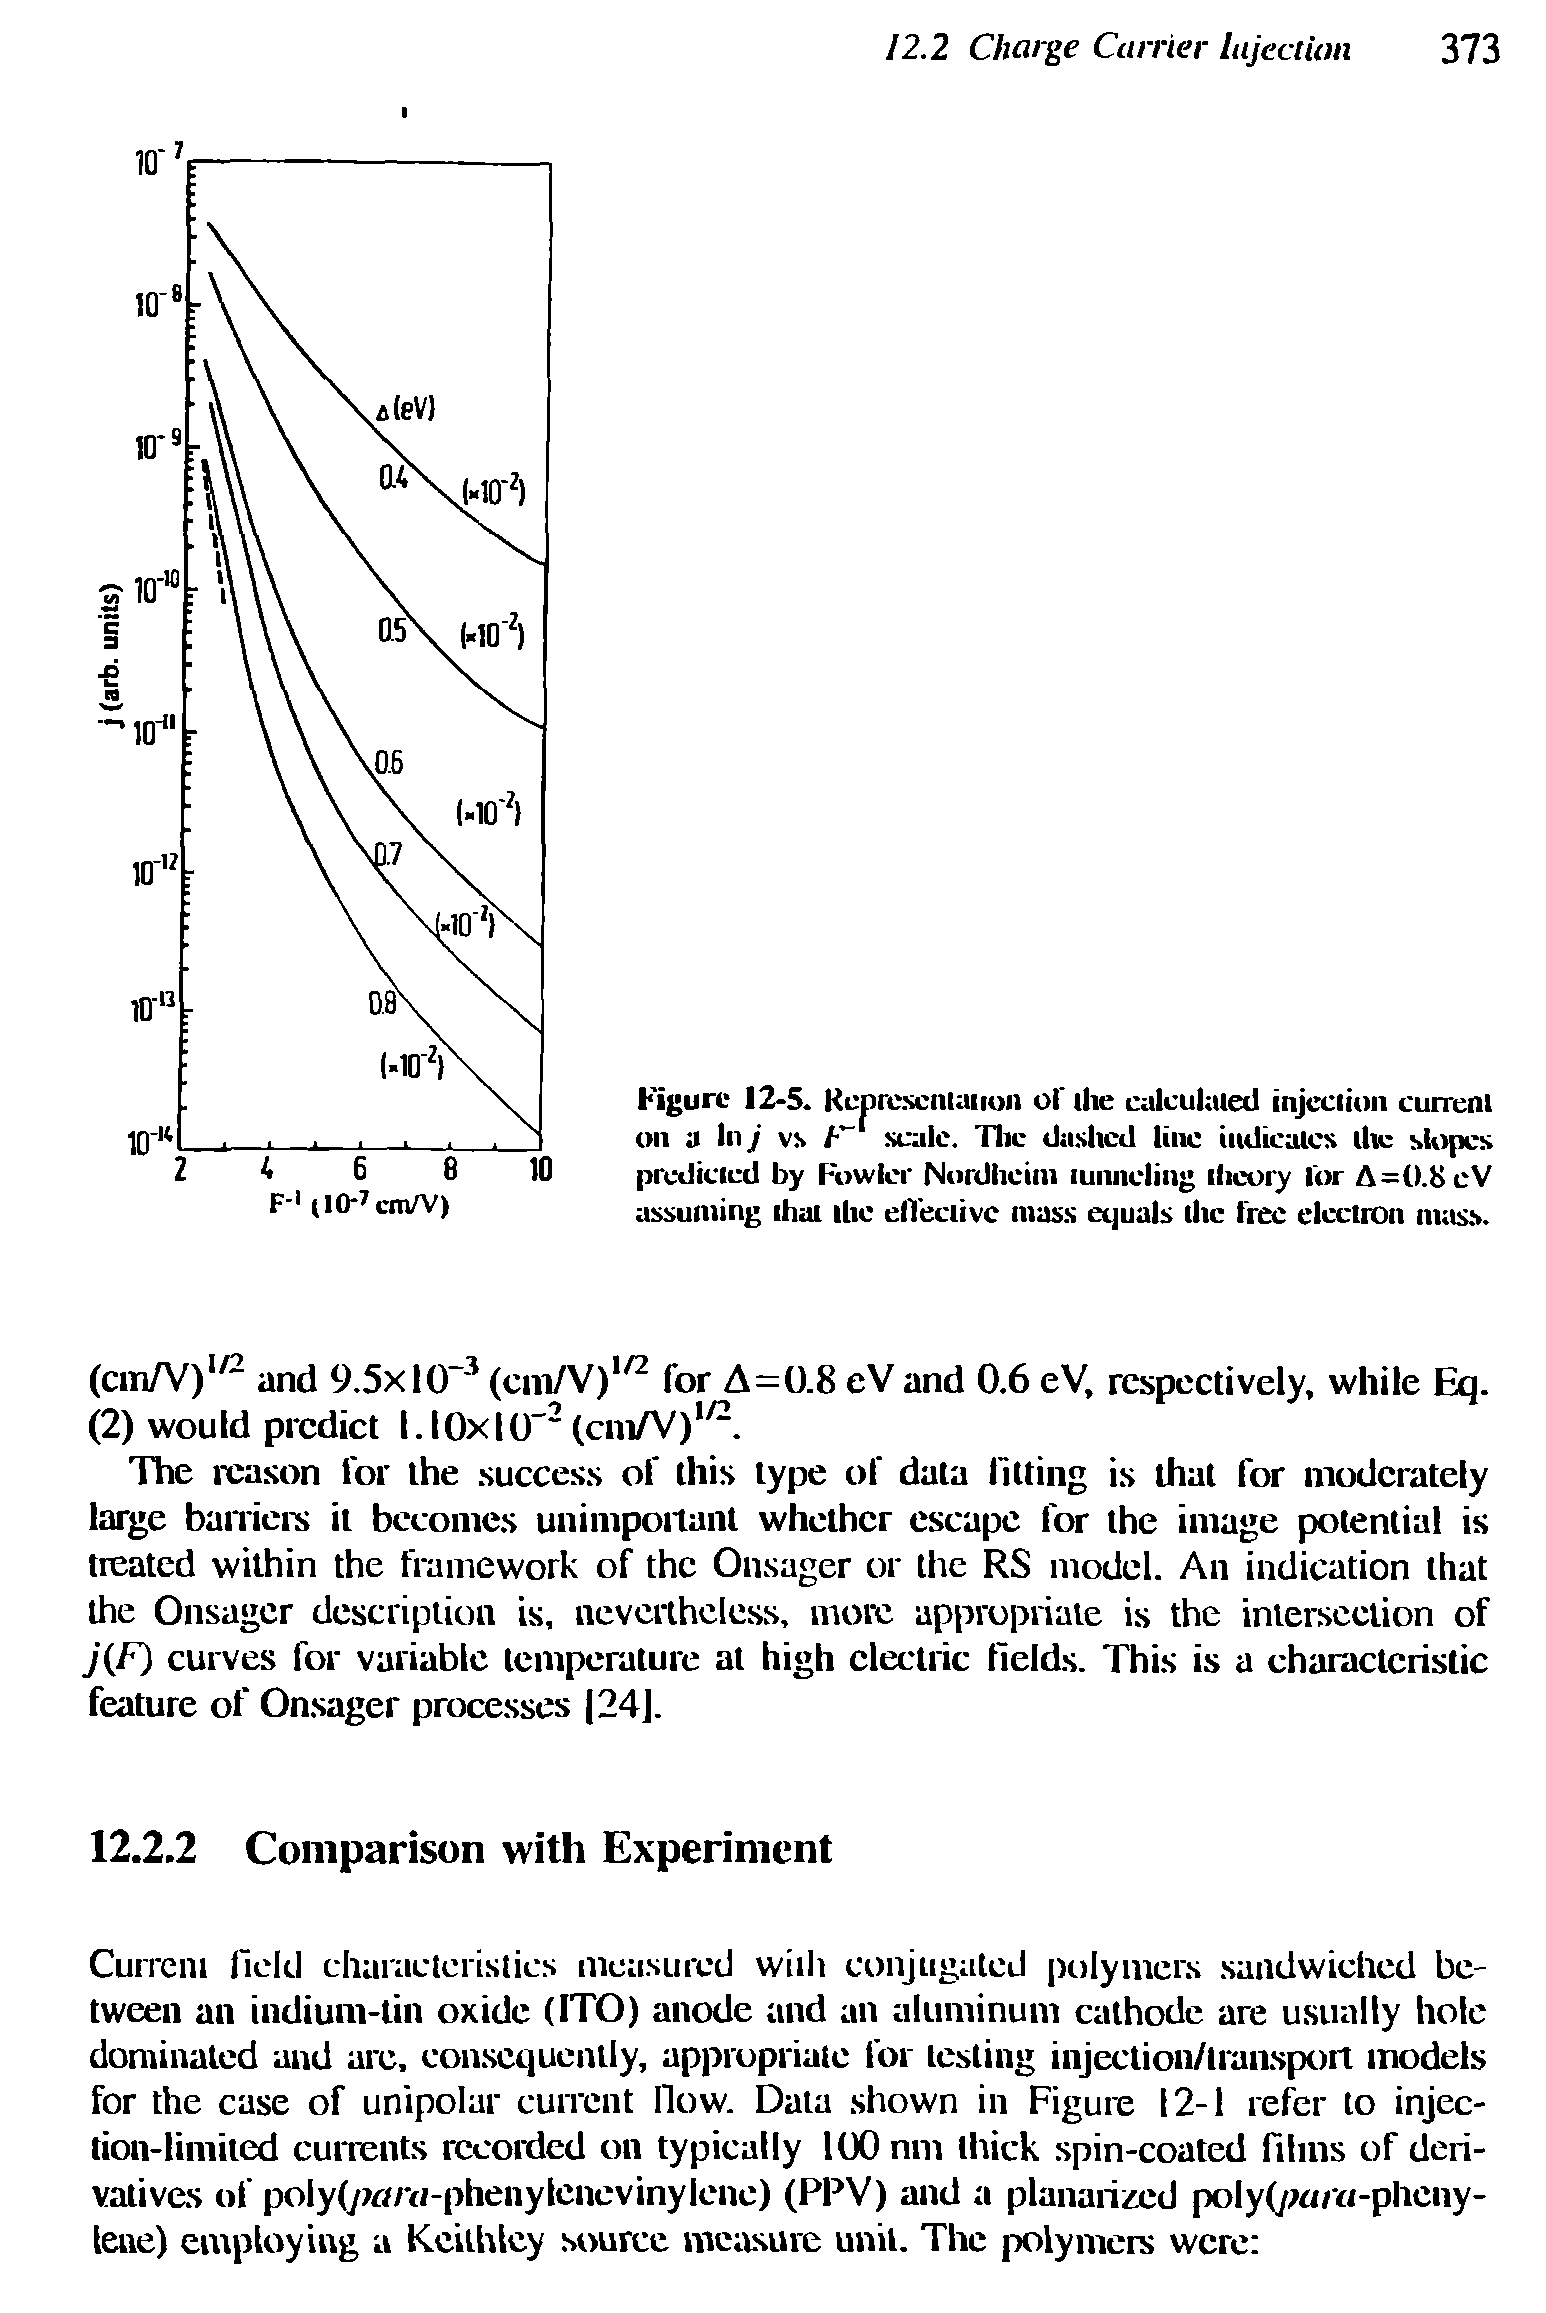 Figure 12-5. Kcprcscmauun of Uie calculated injcciiou curretu on a 111 j vs scale. Tlic dashed line indicates tile slopes predicted by Fowler Nordheiin tunneling theory lor A=0.8eV assuming that the effective mass equals the free electron mass.